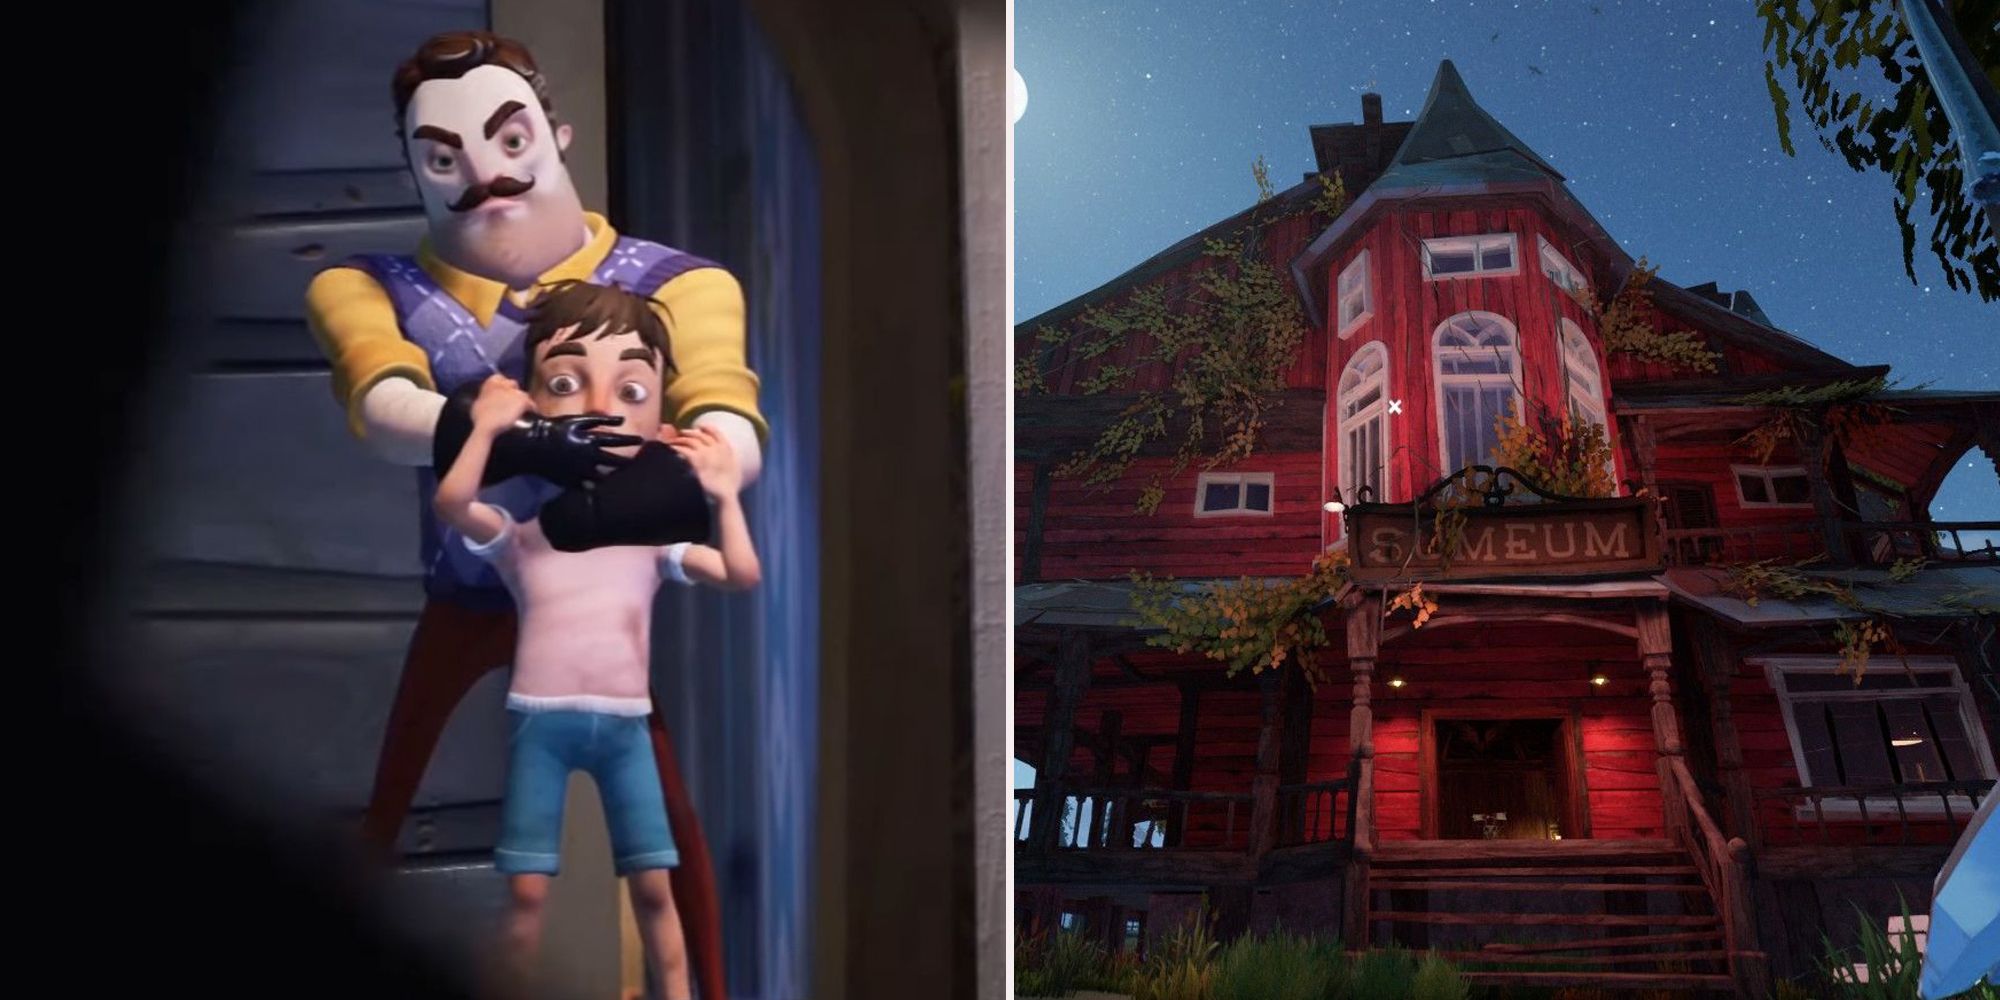 The left photo is The Neighbor holding his hand over a young boys mouth. The right photo is an outside view of The Museum from Hello Neighbor 2.